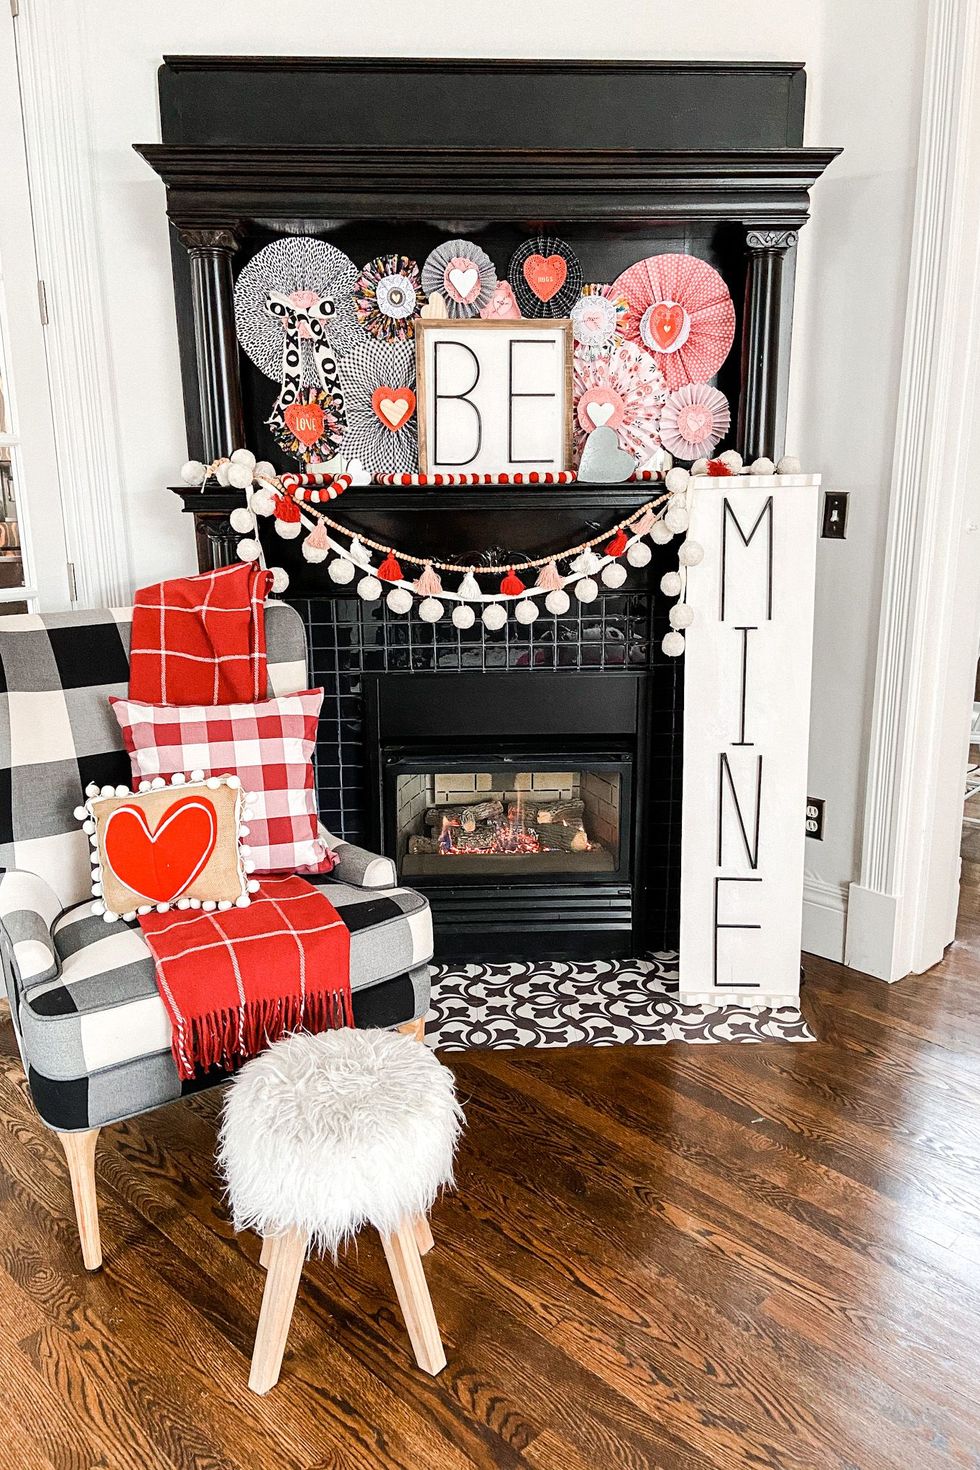 Decorating a Living Room for Valentine's Day with Streamers